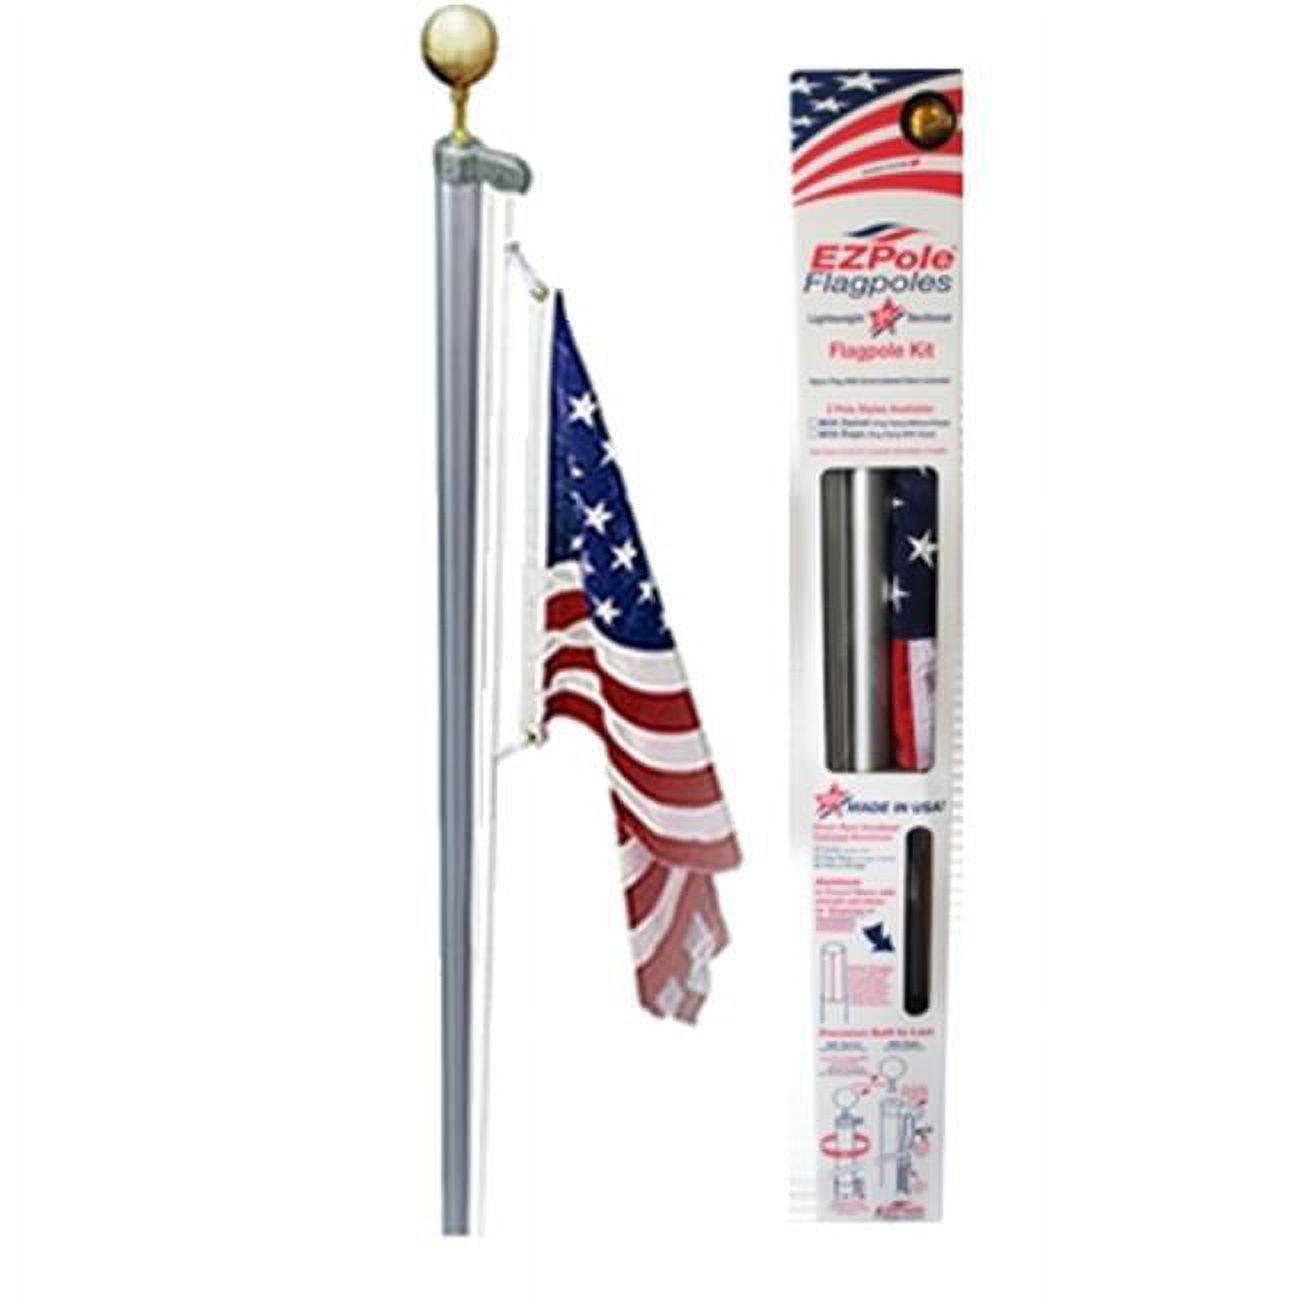 Classic 21ft High-Performance Aluminum Flagpole Kit with Rope System